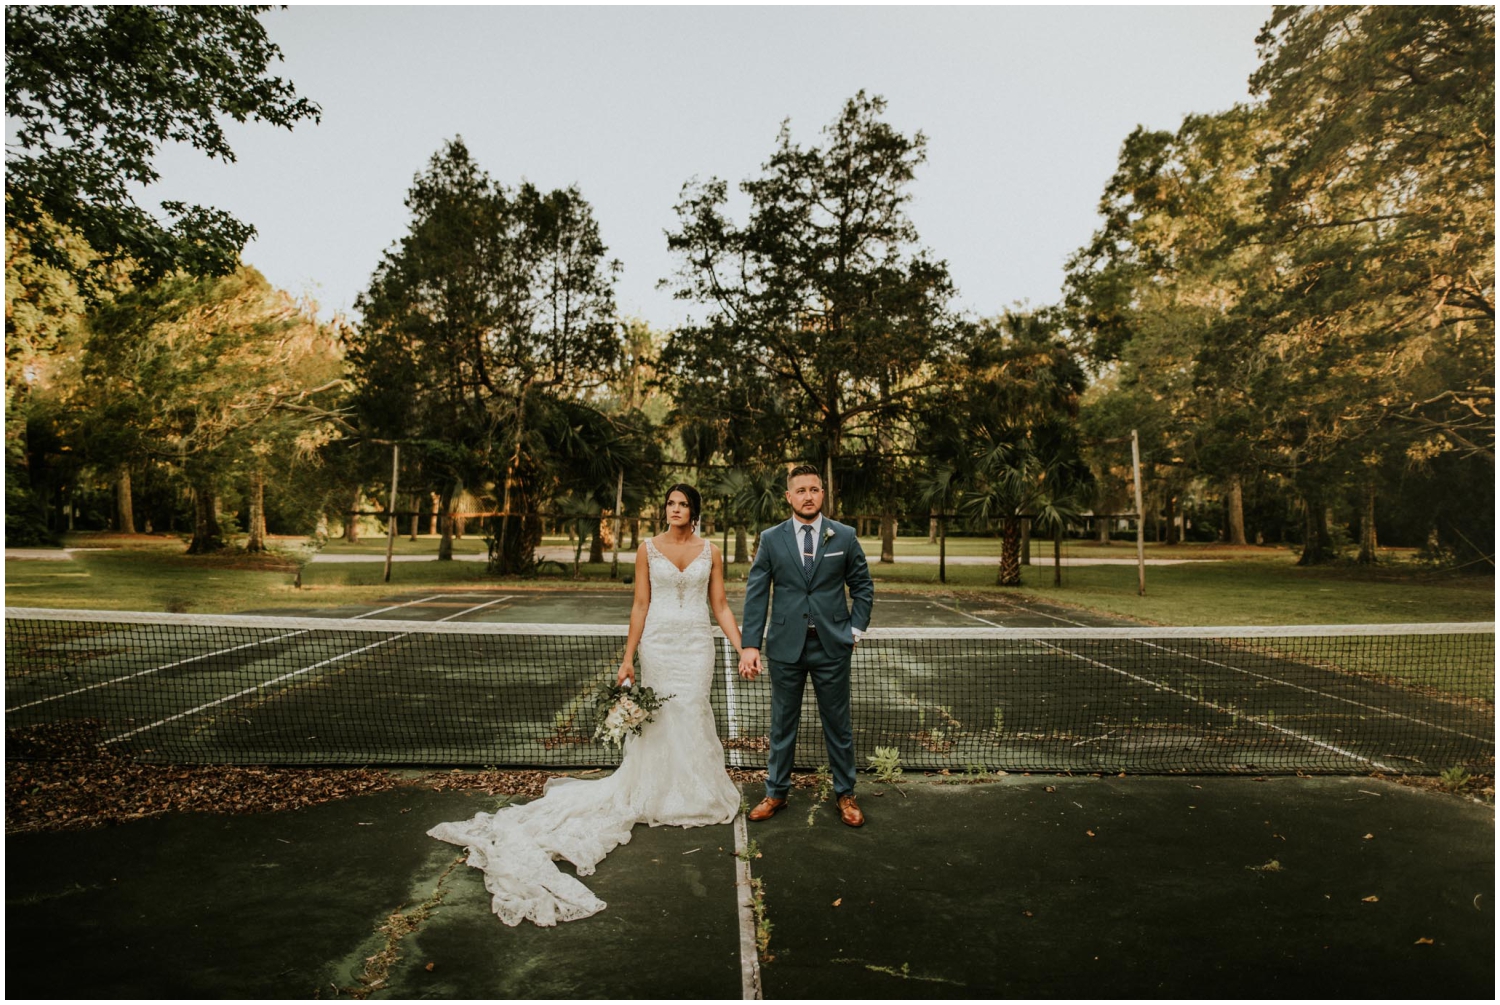  bride and groom tennis court 